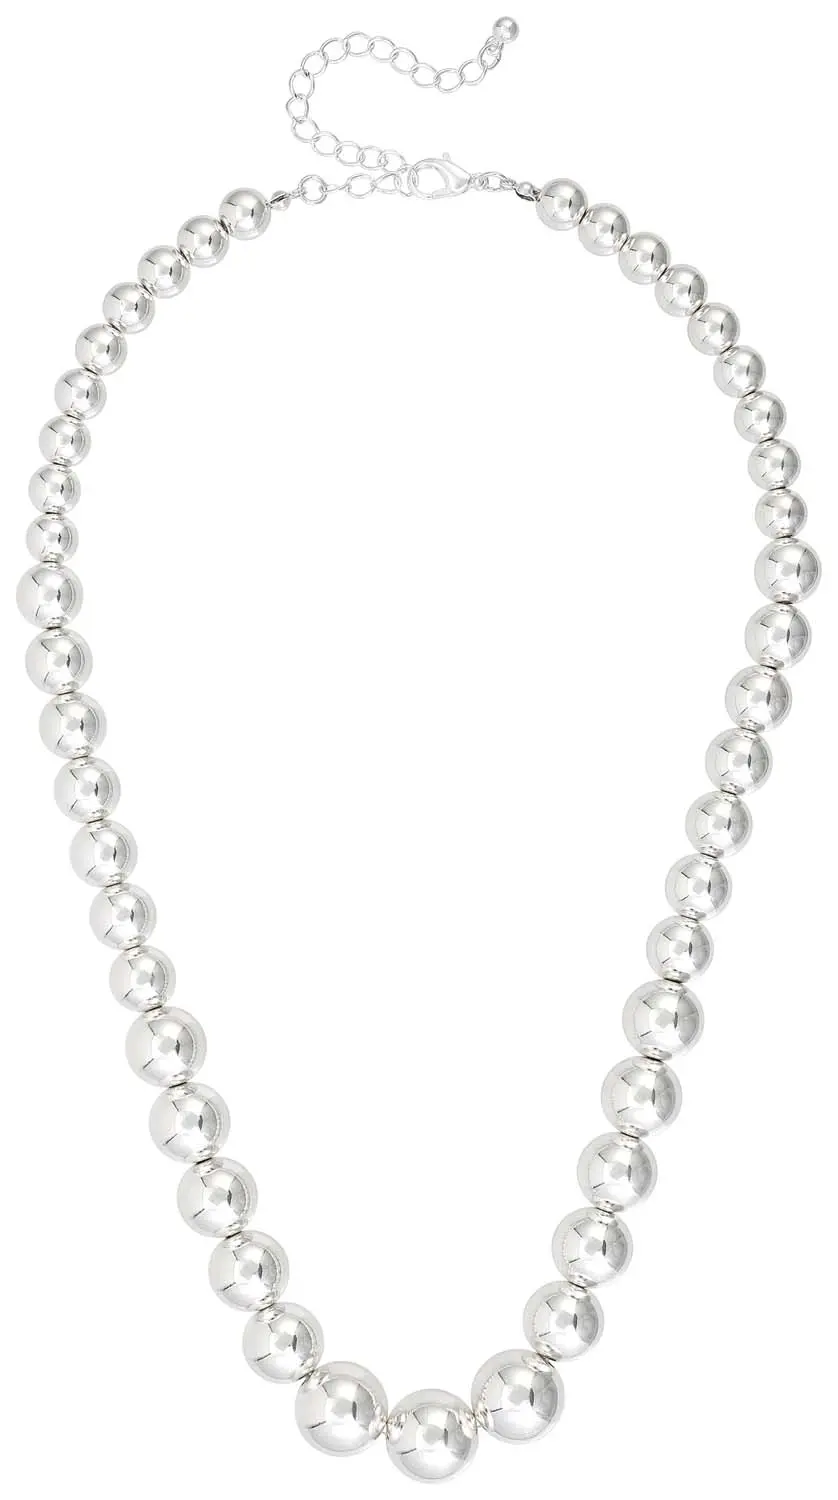 Kette - Reflective Pearls